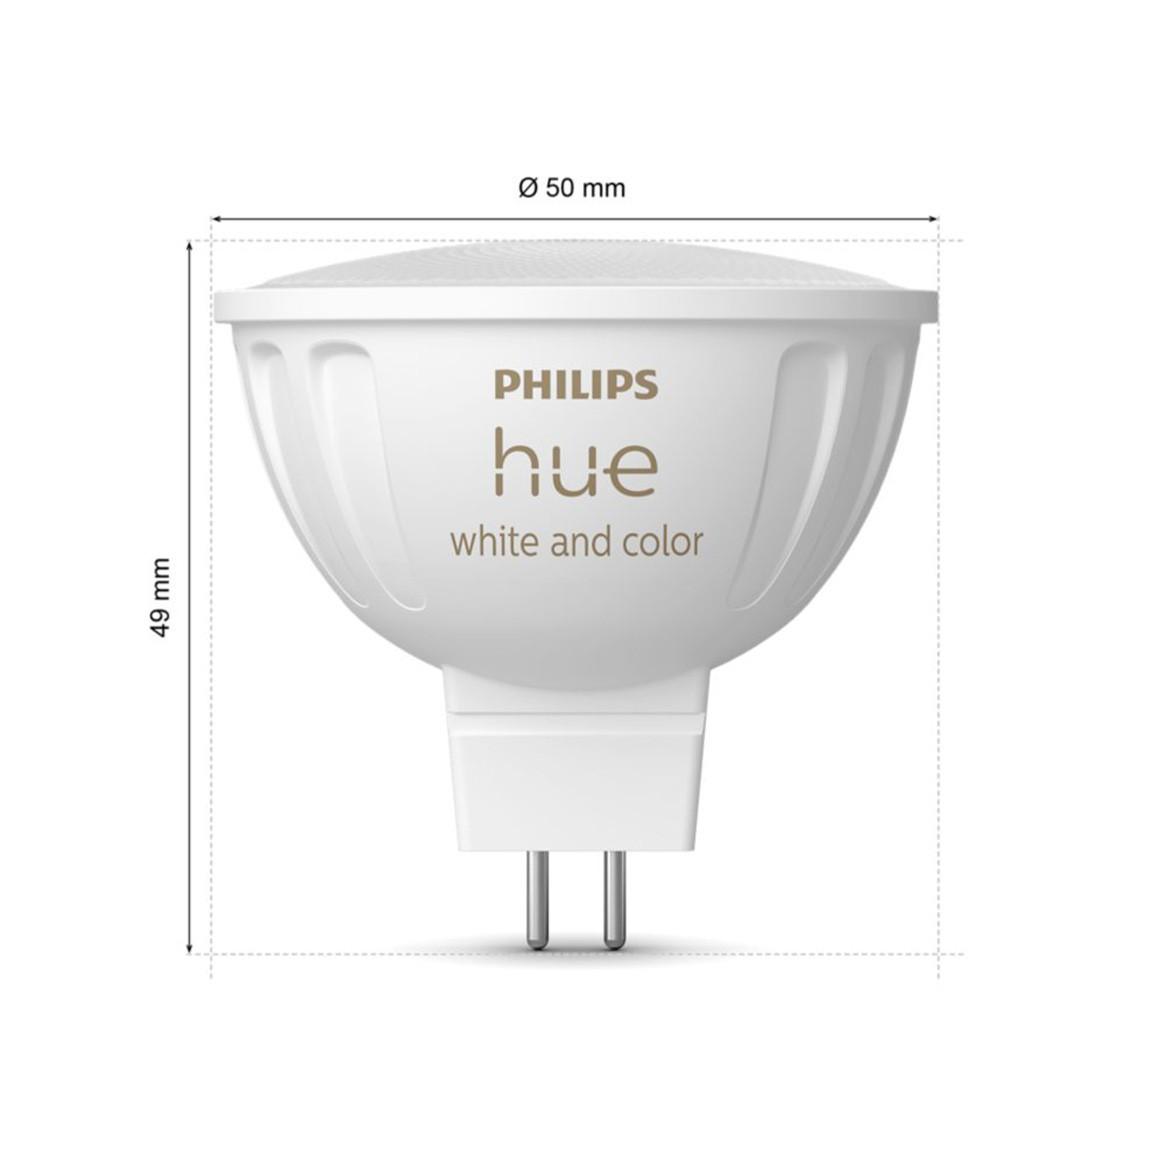 Philips Hue White & Col. Amb. MR16 LED Lampe Doppelpack 2x400lm - Weiß_maße